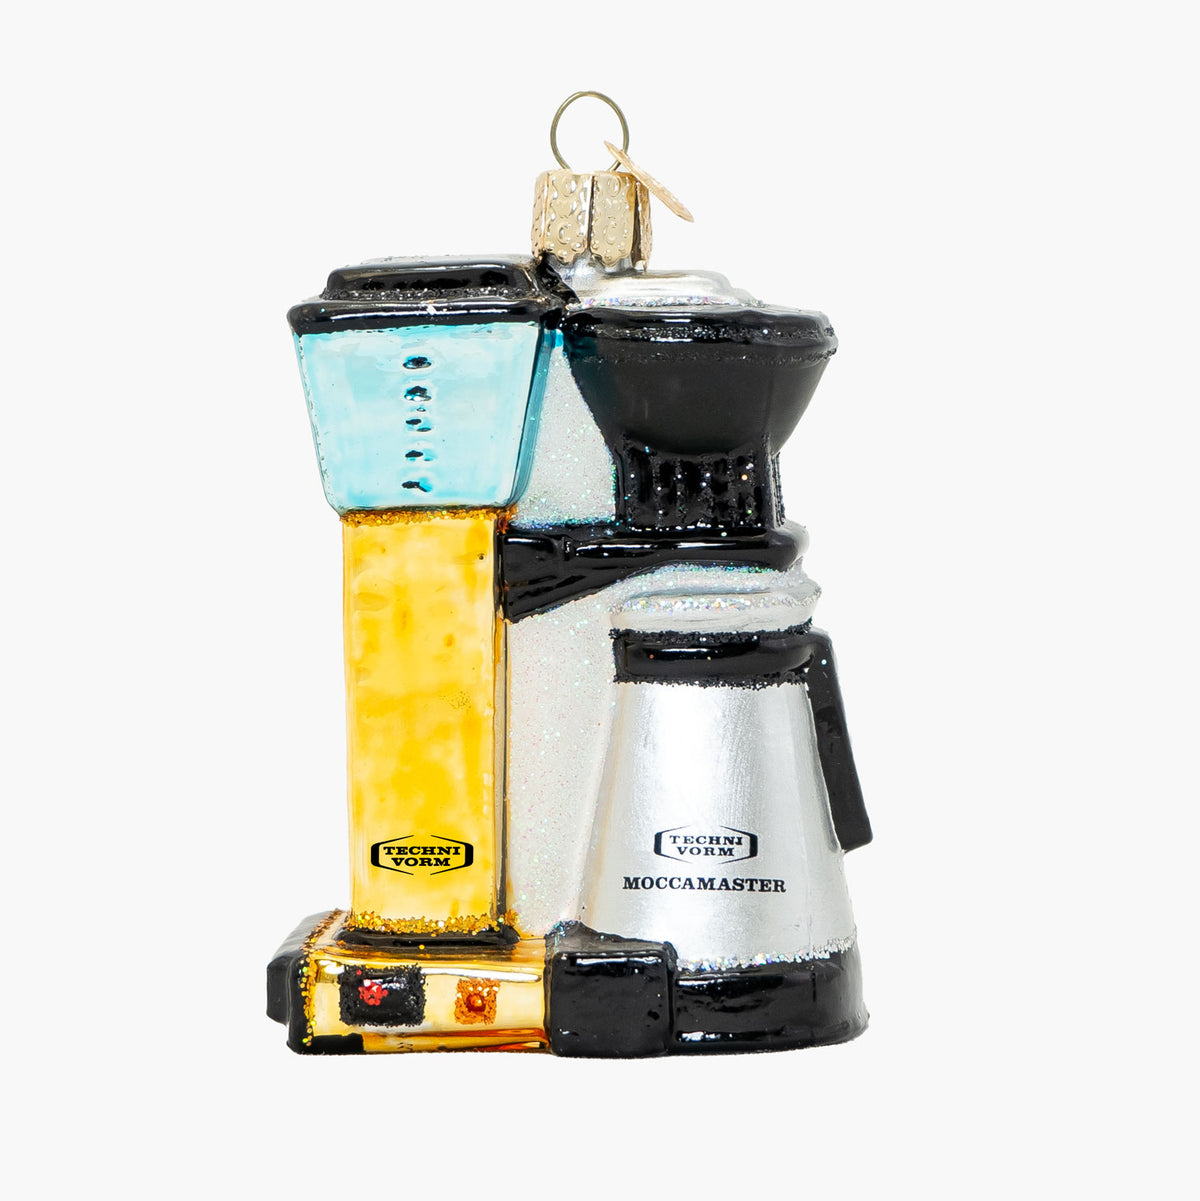 Moccamaster Thermal Carafe Brewer Ornament